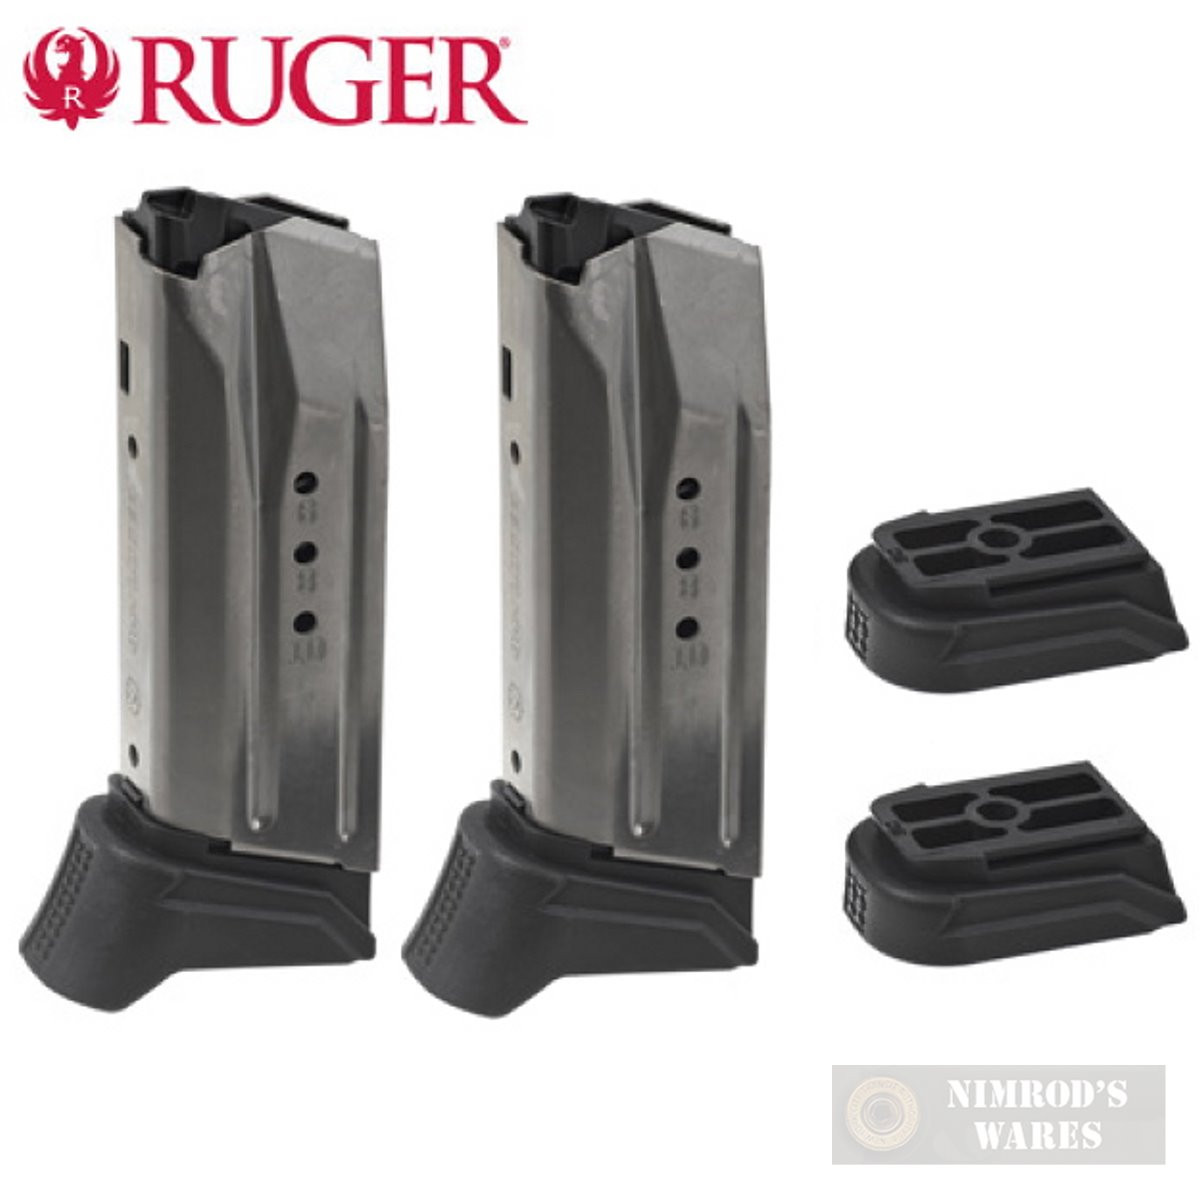 Ruger American Compact Pistol 9mm 10 Round Magazine 90617 for sale online 